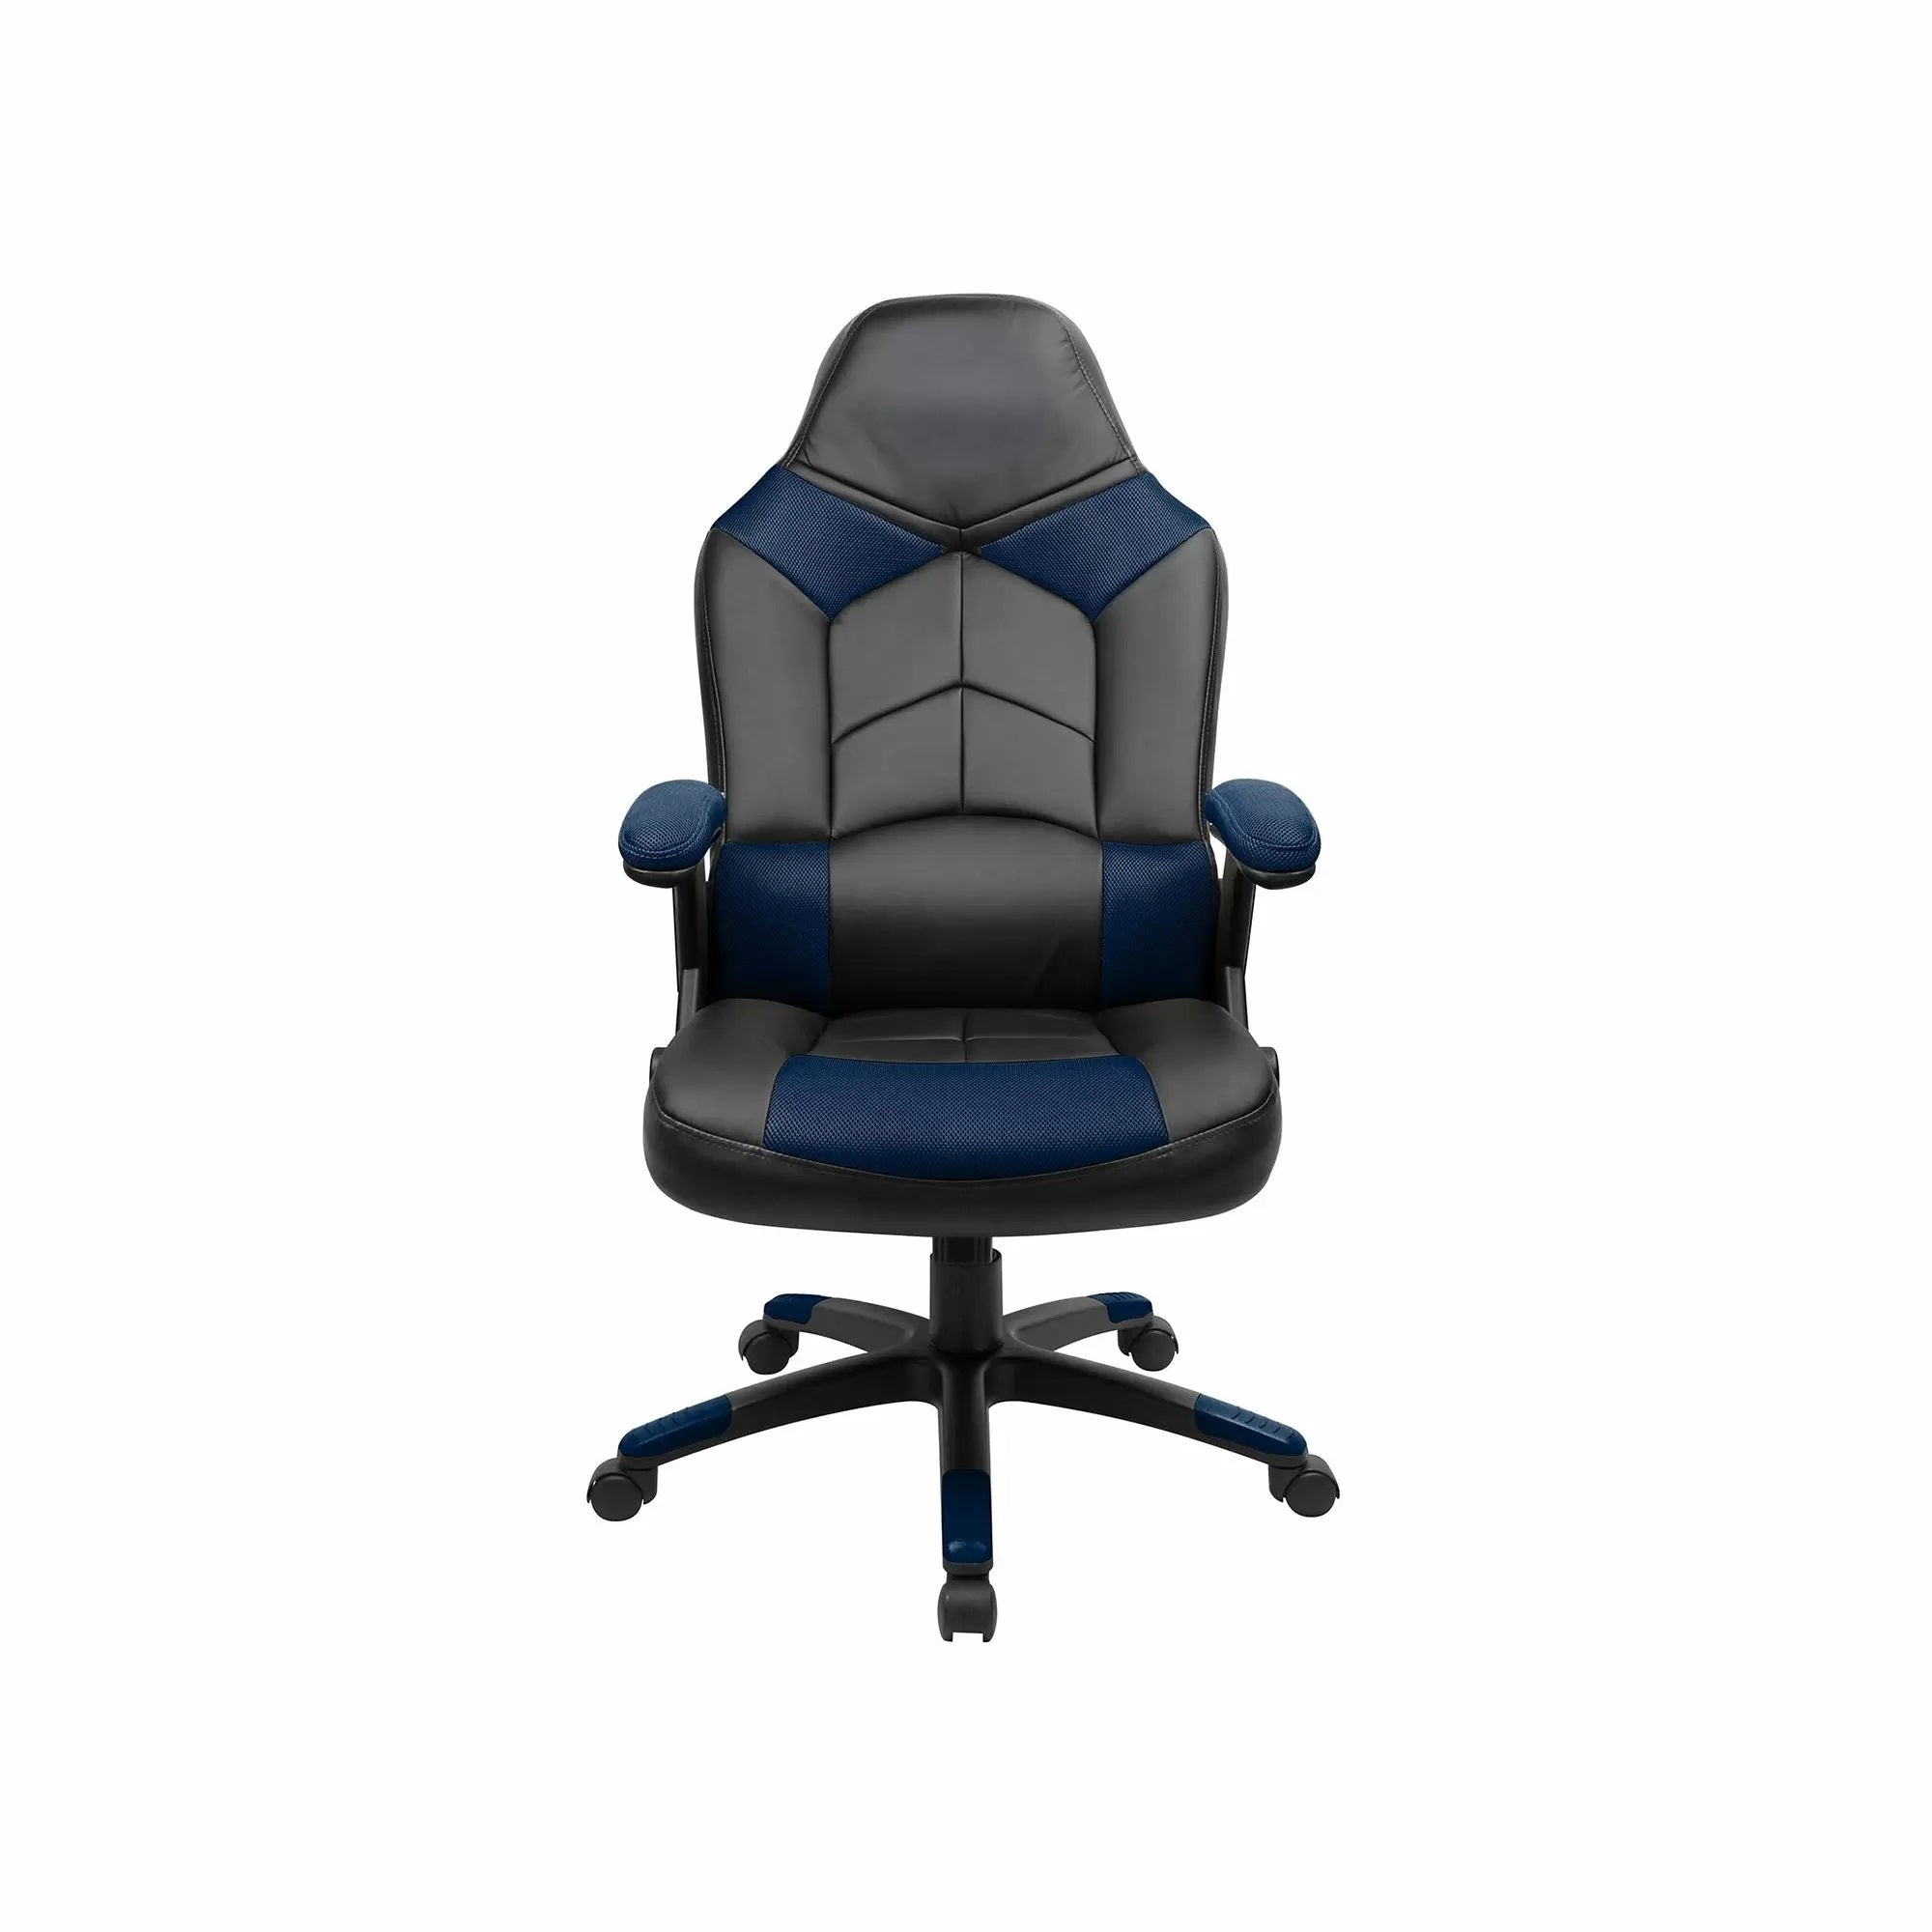 Imperial USA Oversized Video Gaming Chair Black Blue